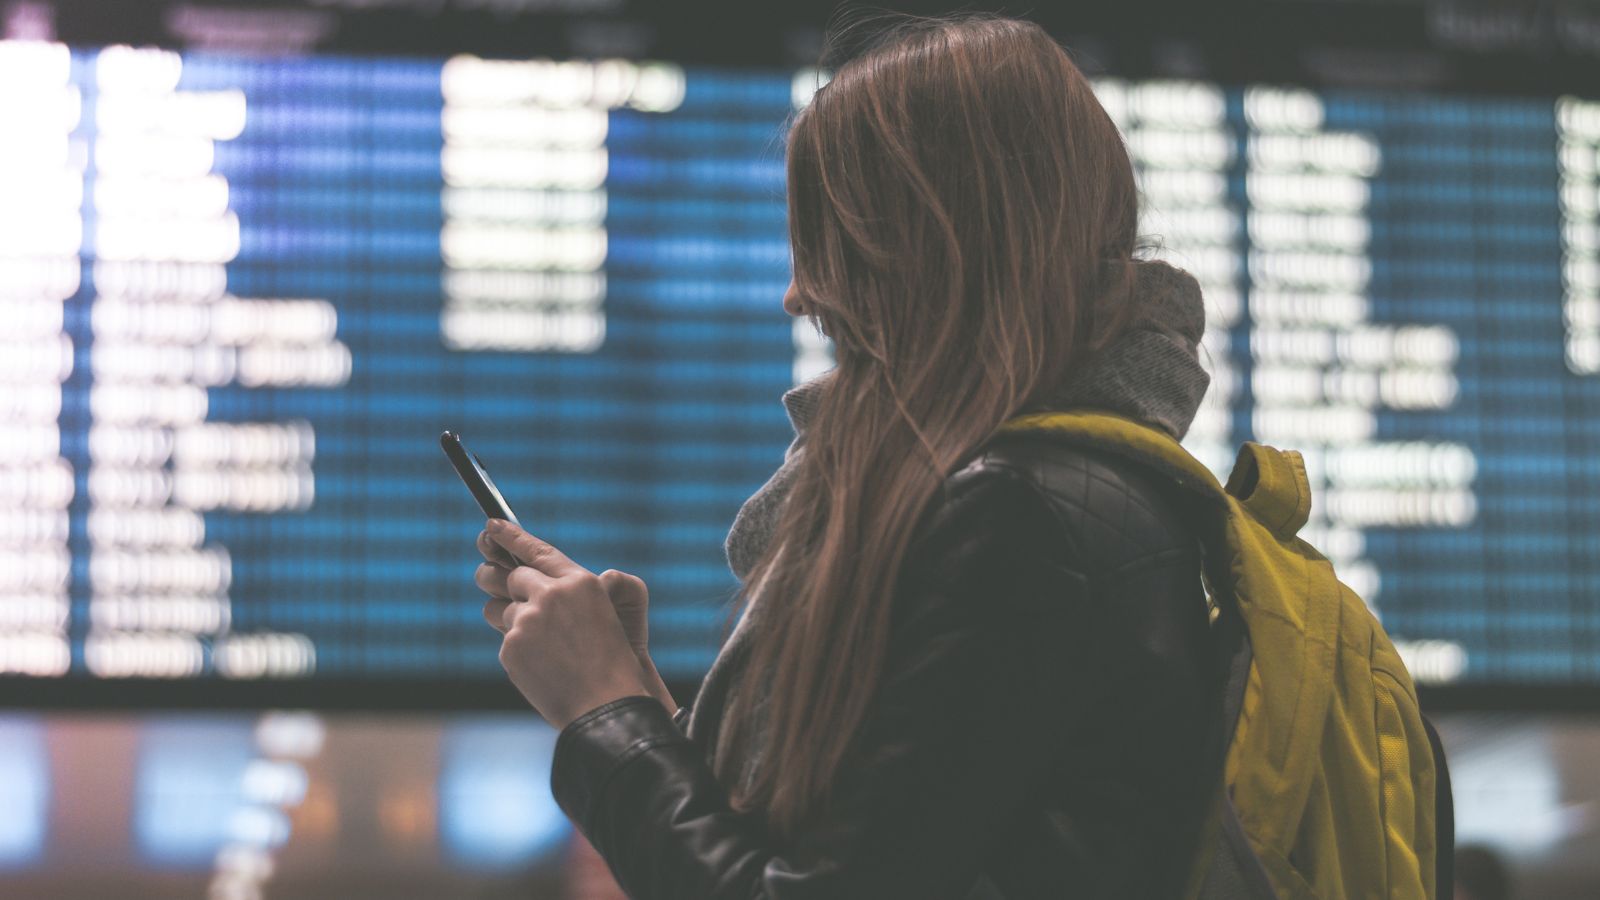 <p>Some airlines have a text alert service. This service will send a text message to your cell phone with any updates about your flight, such as your gate number, as soon as they are available. But most airlines do not offer this service for free.</p>